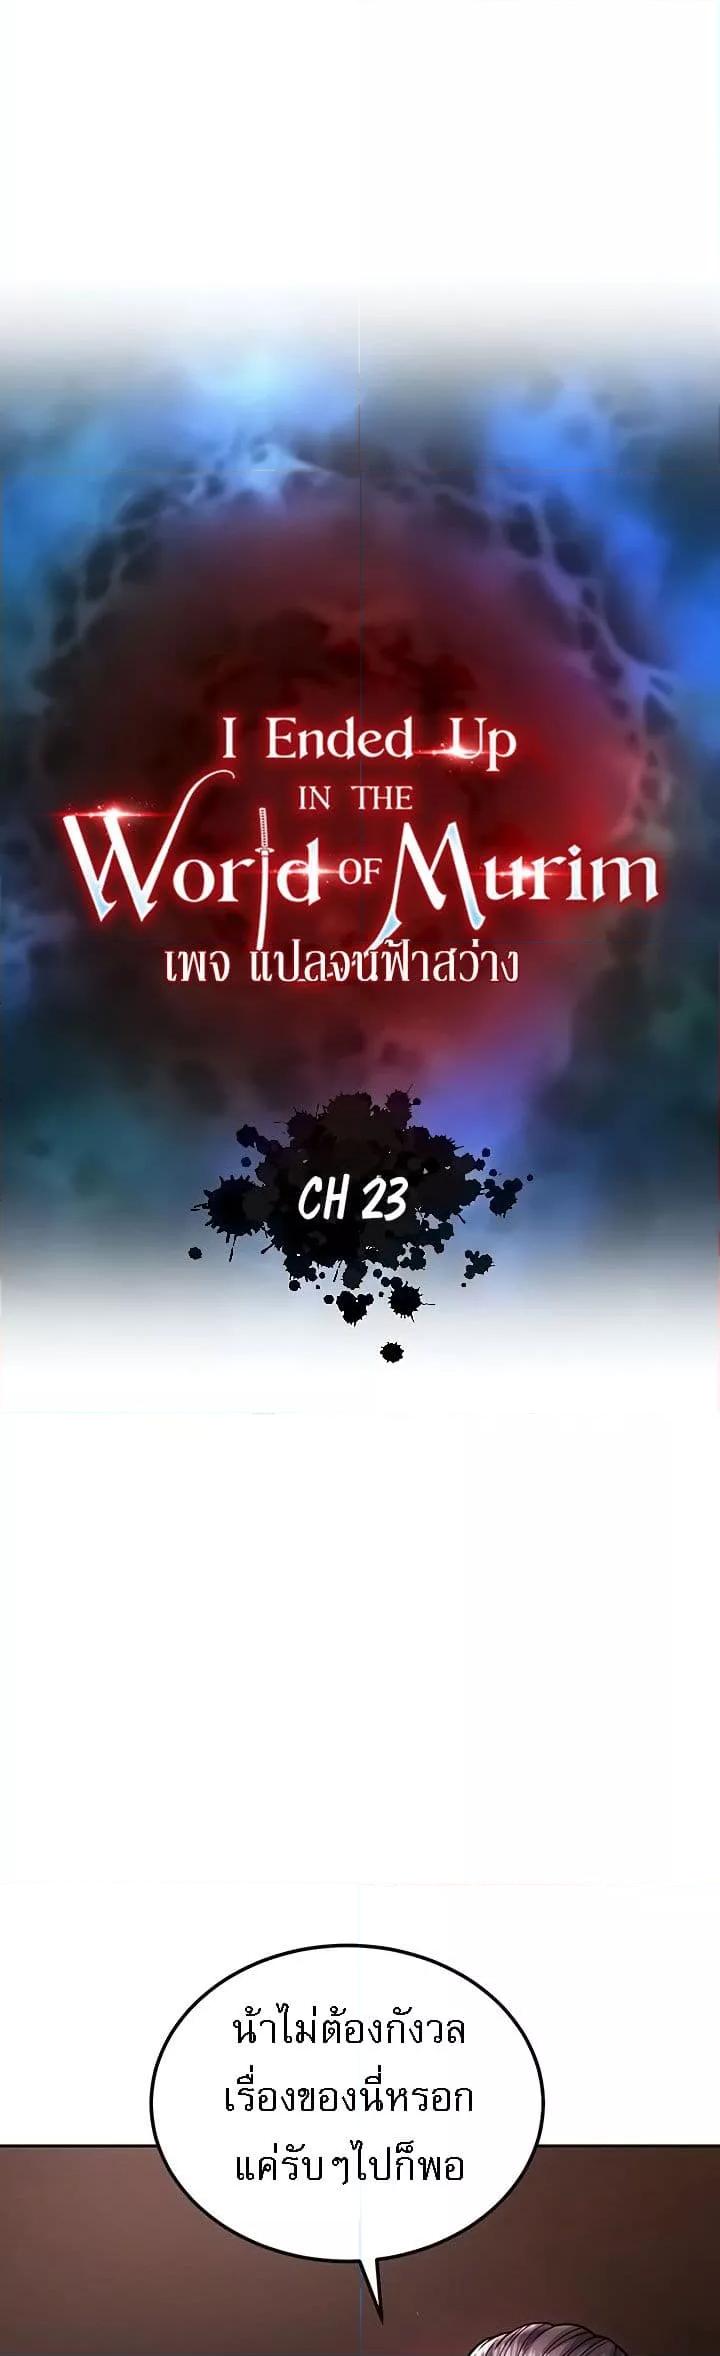 I Ended Up in the World of Murim 23 02